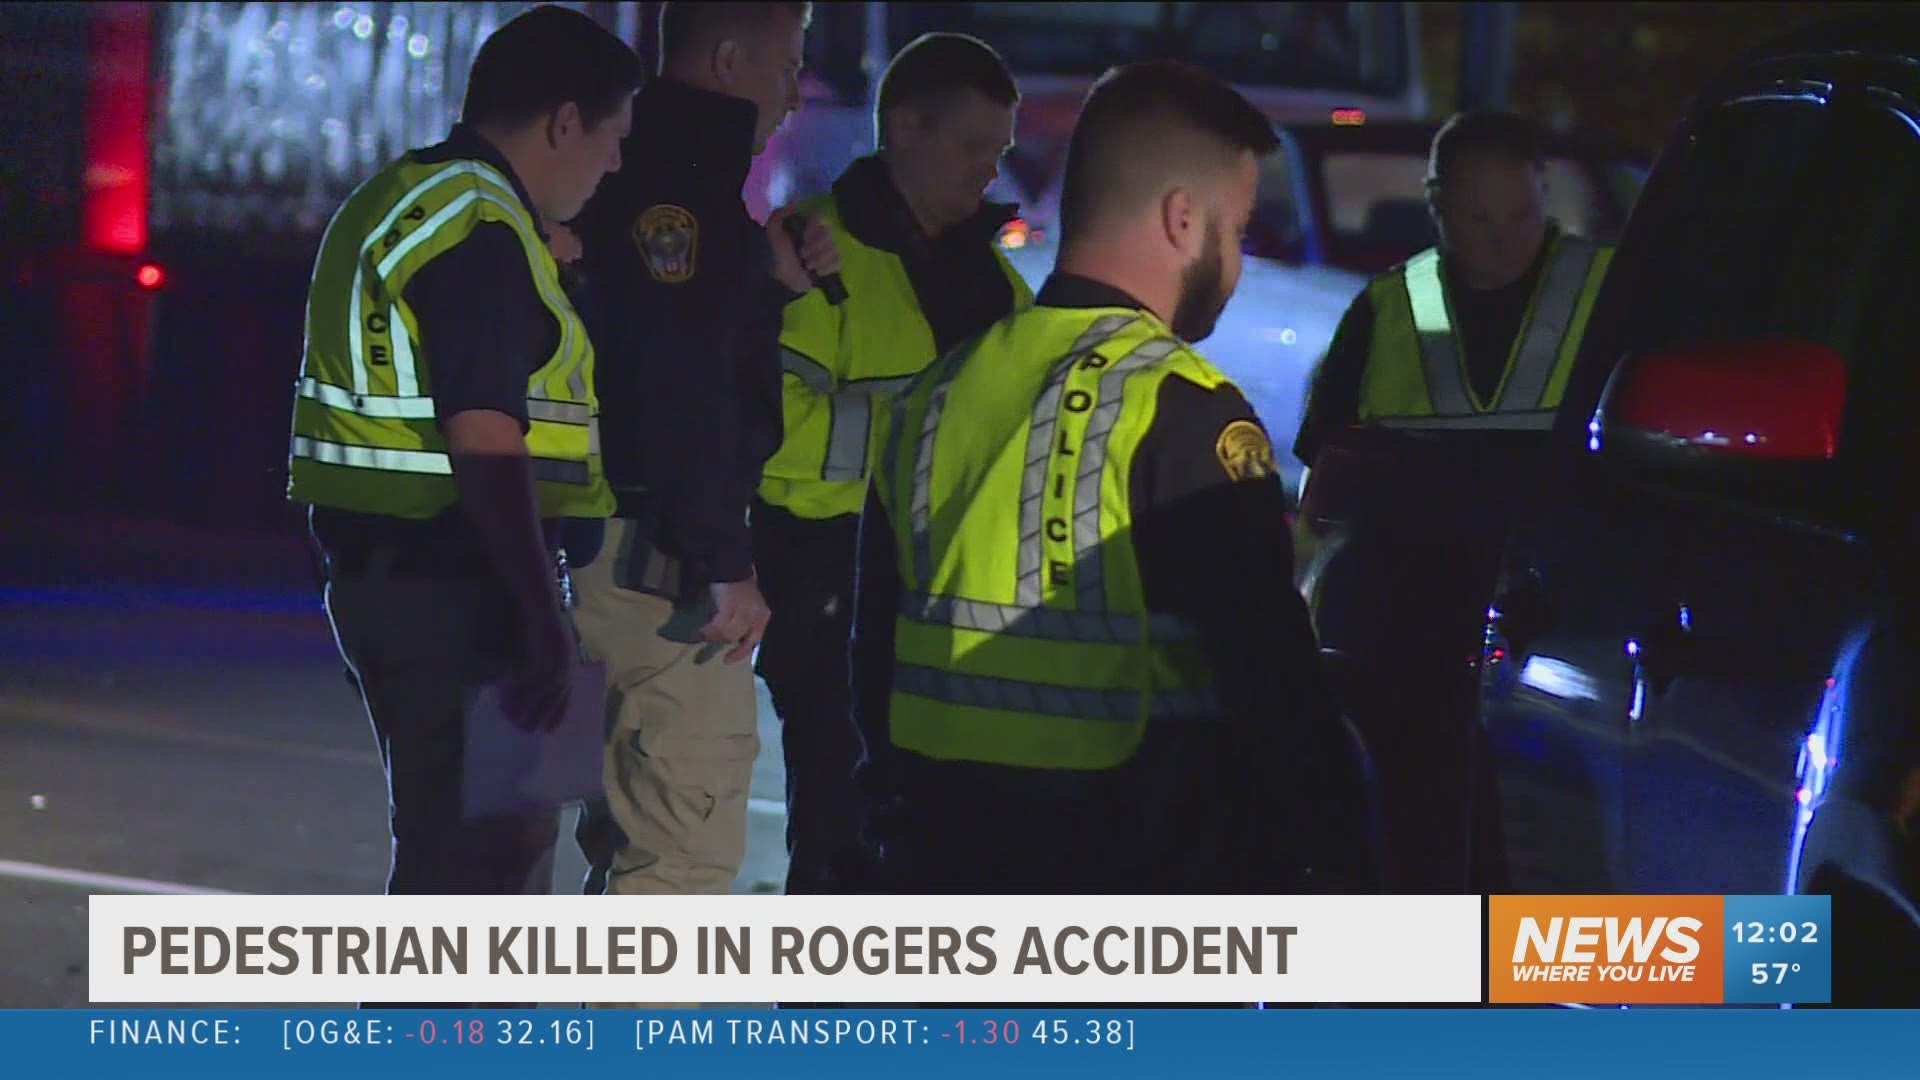 A man was hit and killed while crossing the street in the 1900 block of S. 8th Street in Rogers.